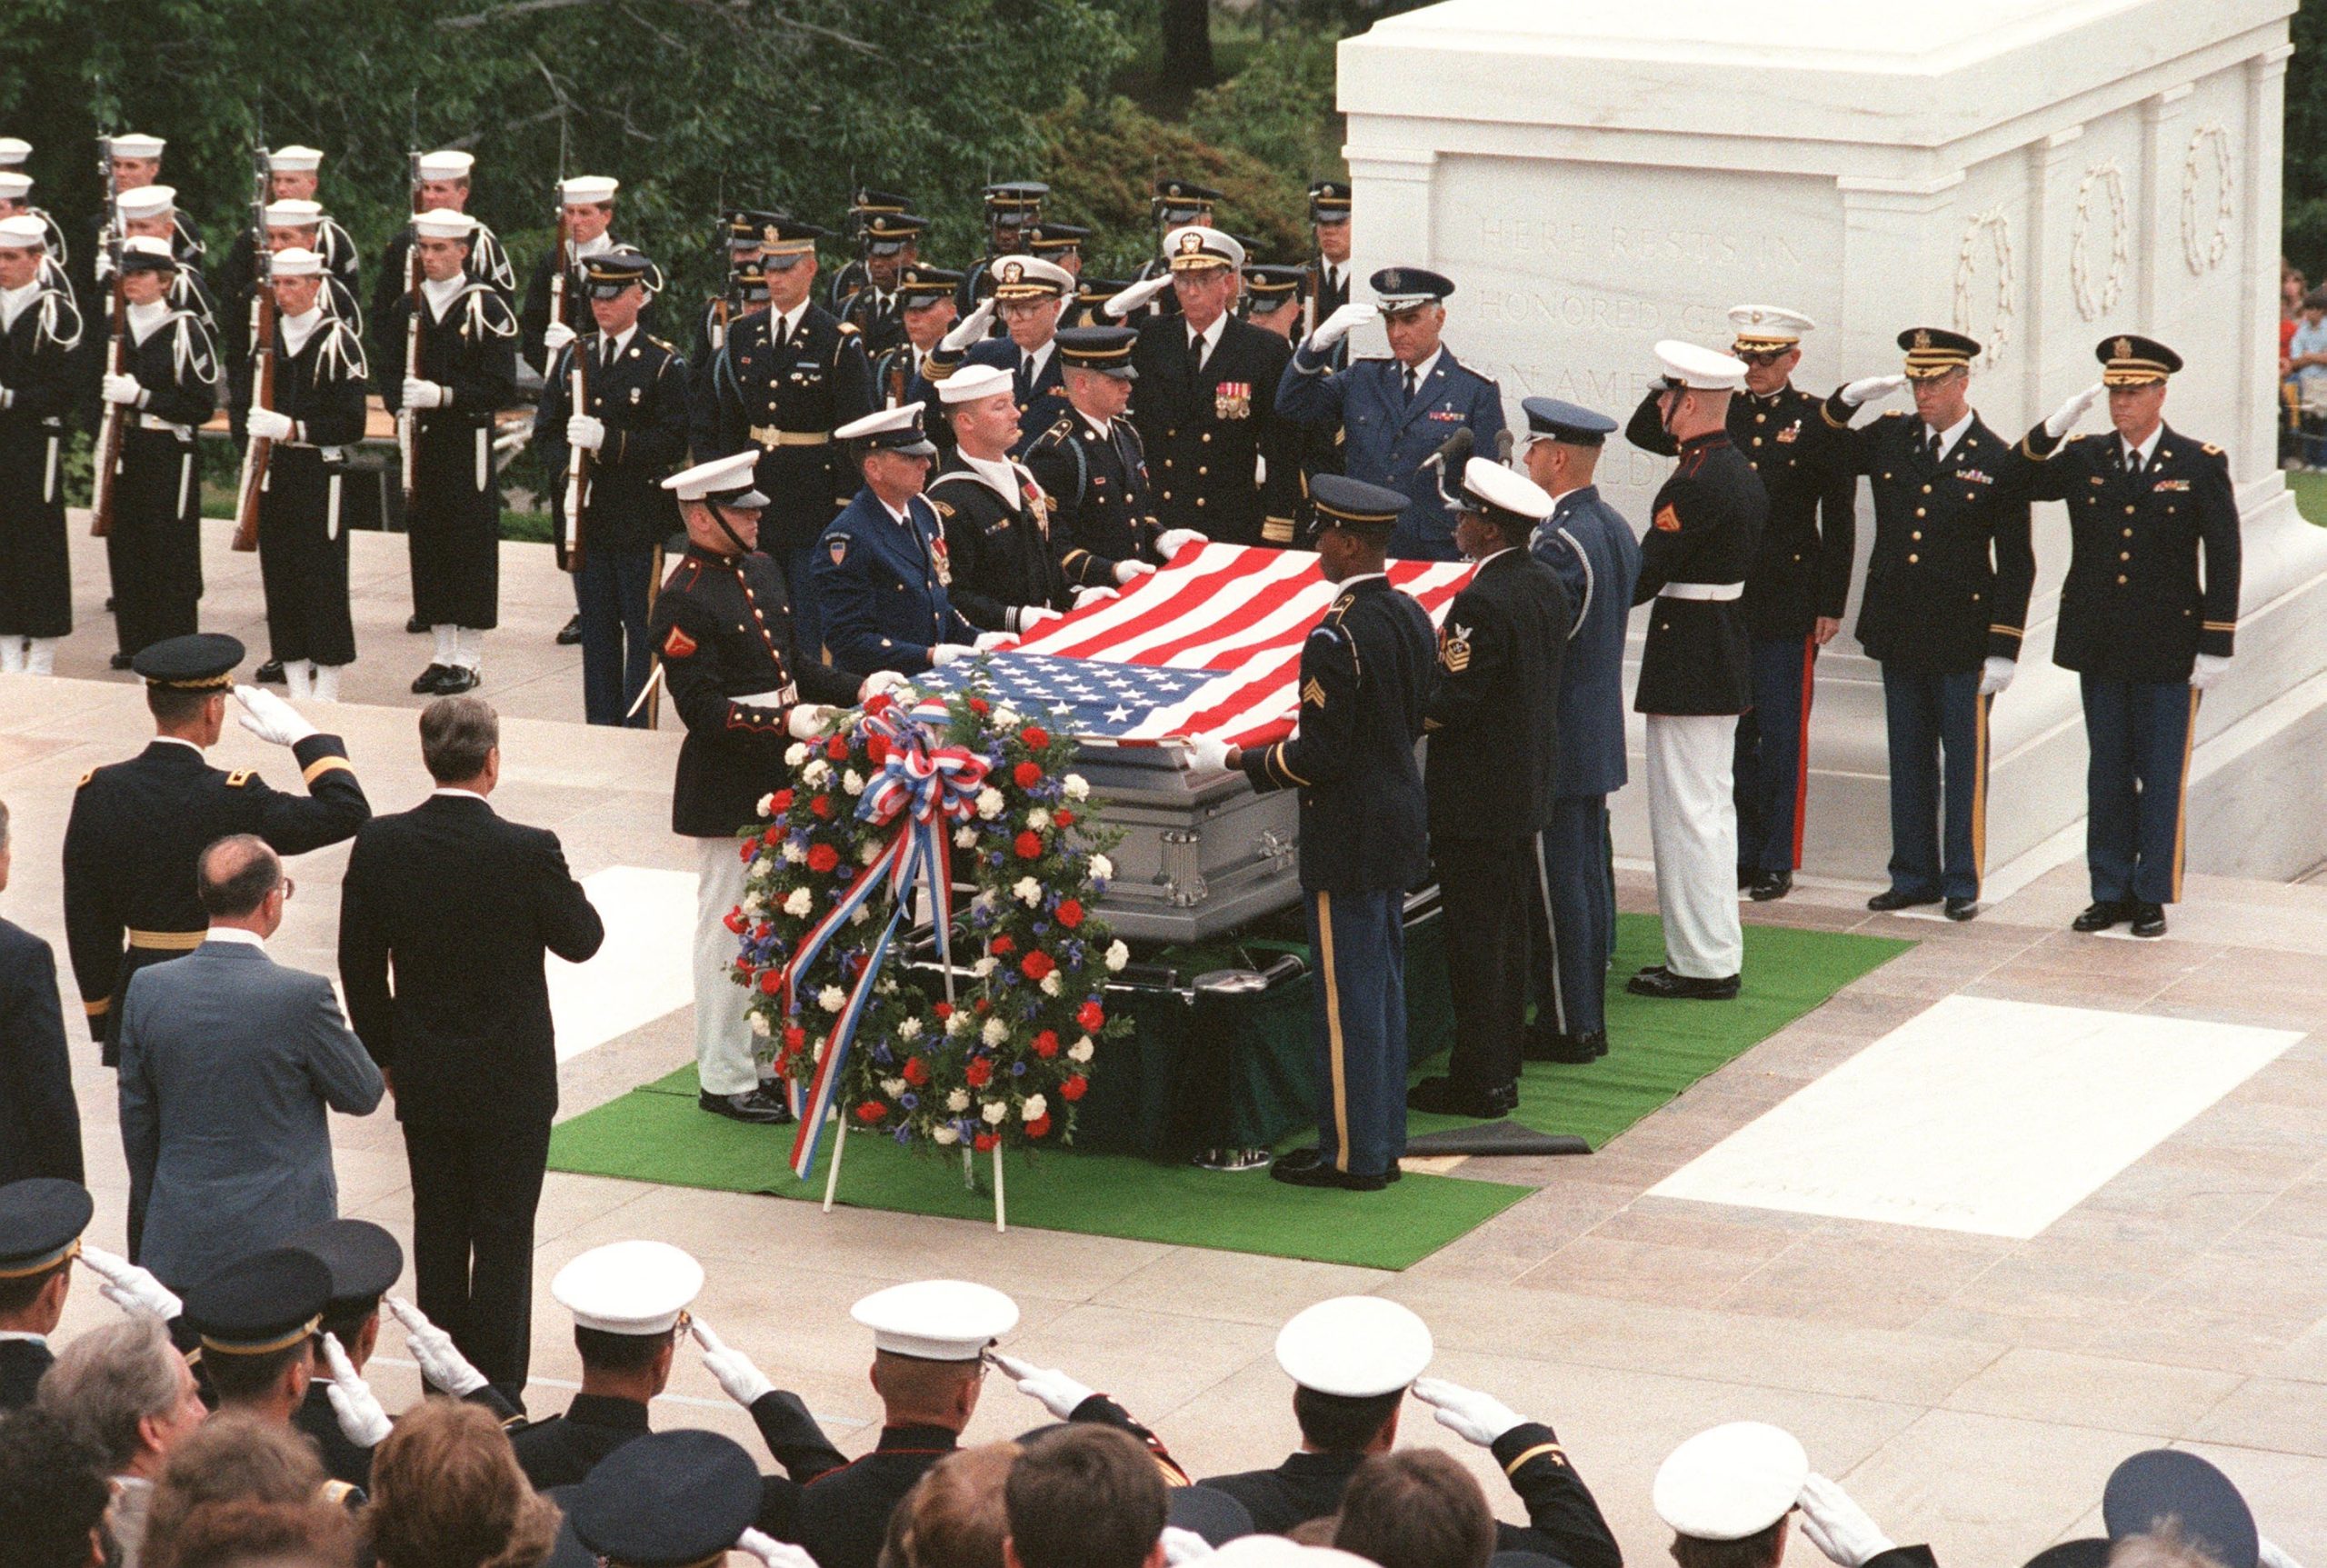 Interment ceremony for Vietnam Unknown at the Tomb of the Unknown Soldier, with President Ronald Reagan presiding, May 28, 1984. Testing later identified the Unknown as Air Force pilot Michael Blassie. (National Archives)